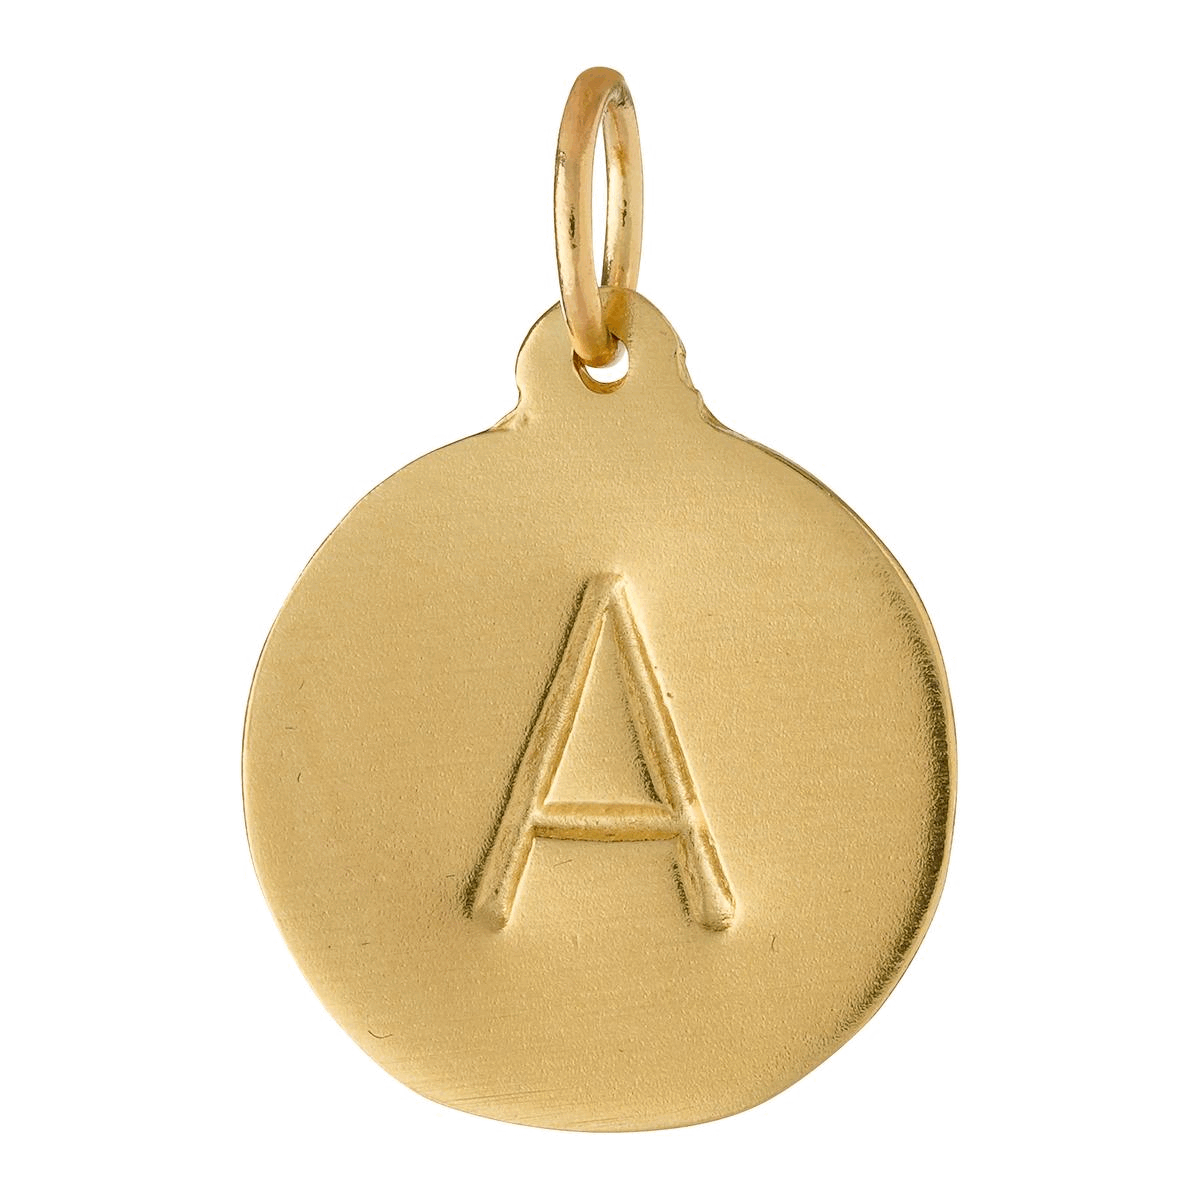  Gold Letter Pendant Charms for Jewelry Making and Crafts (Gold,  26 Pack) : Arts, Crafts & Sewing